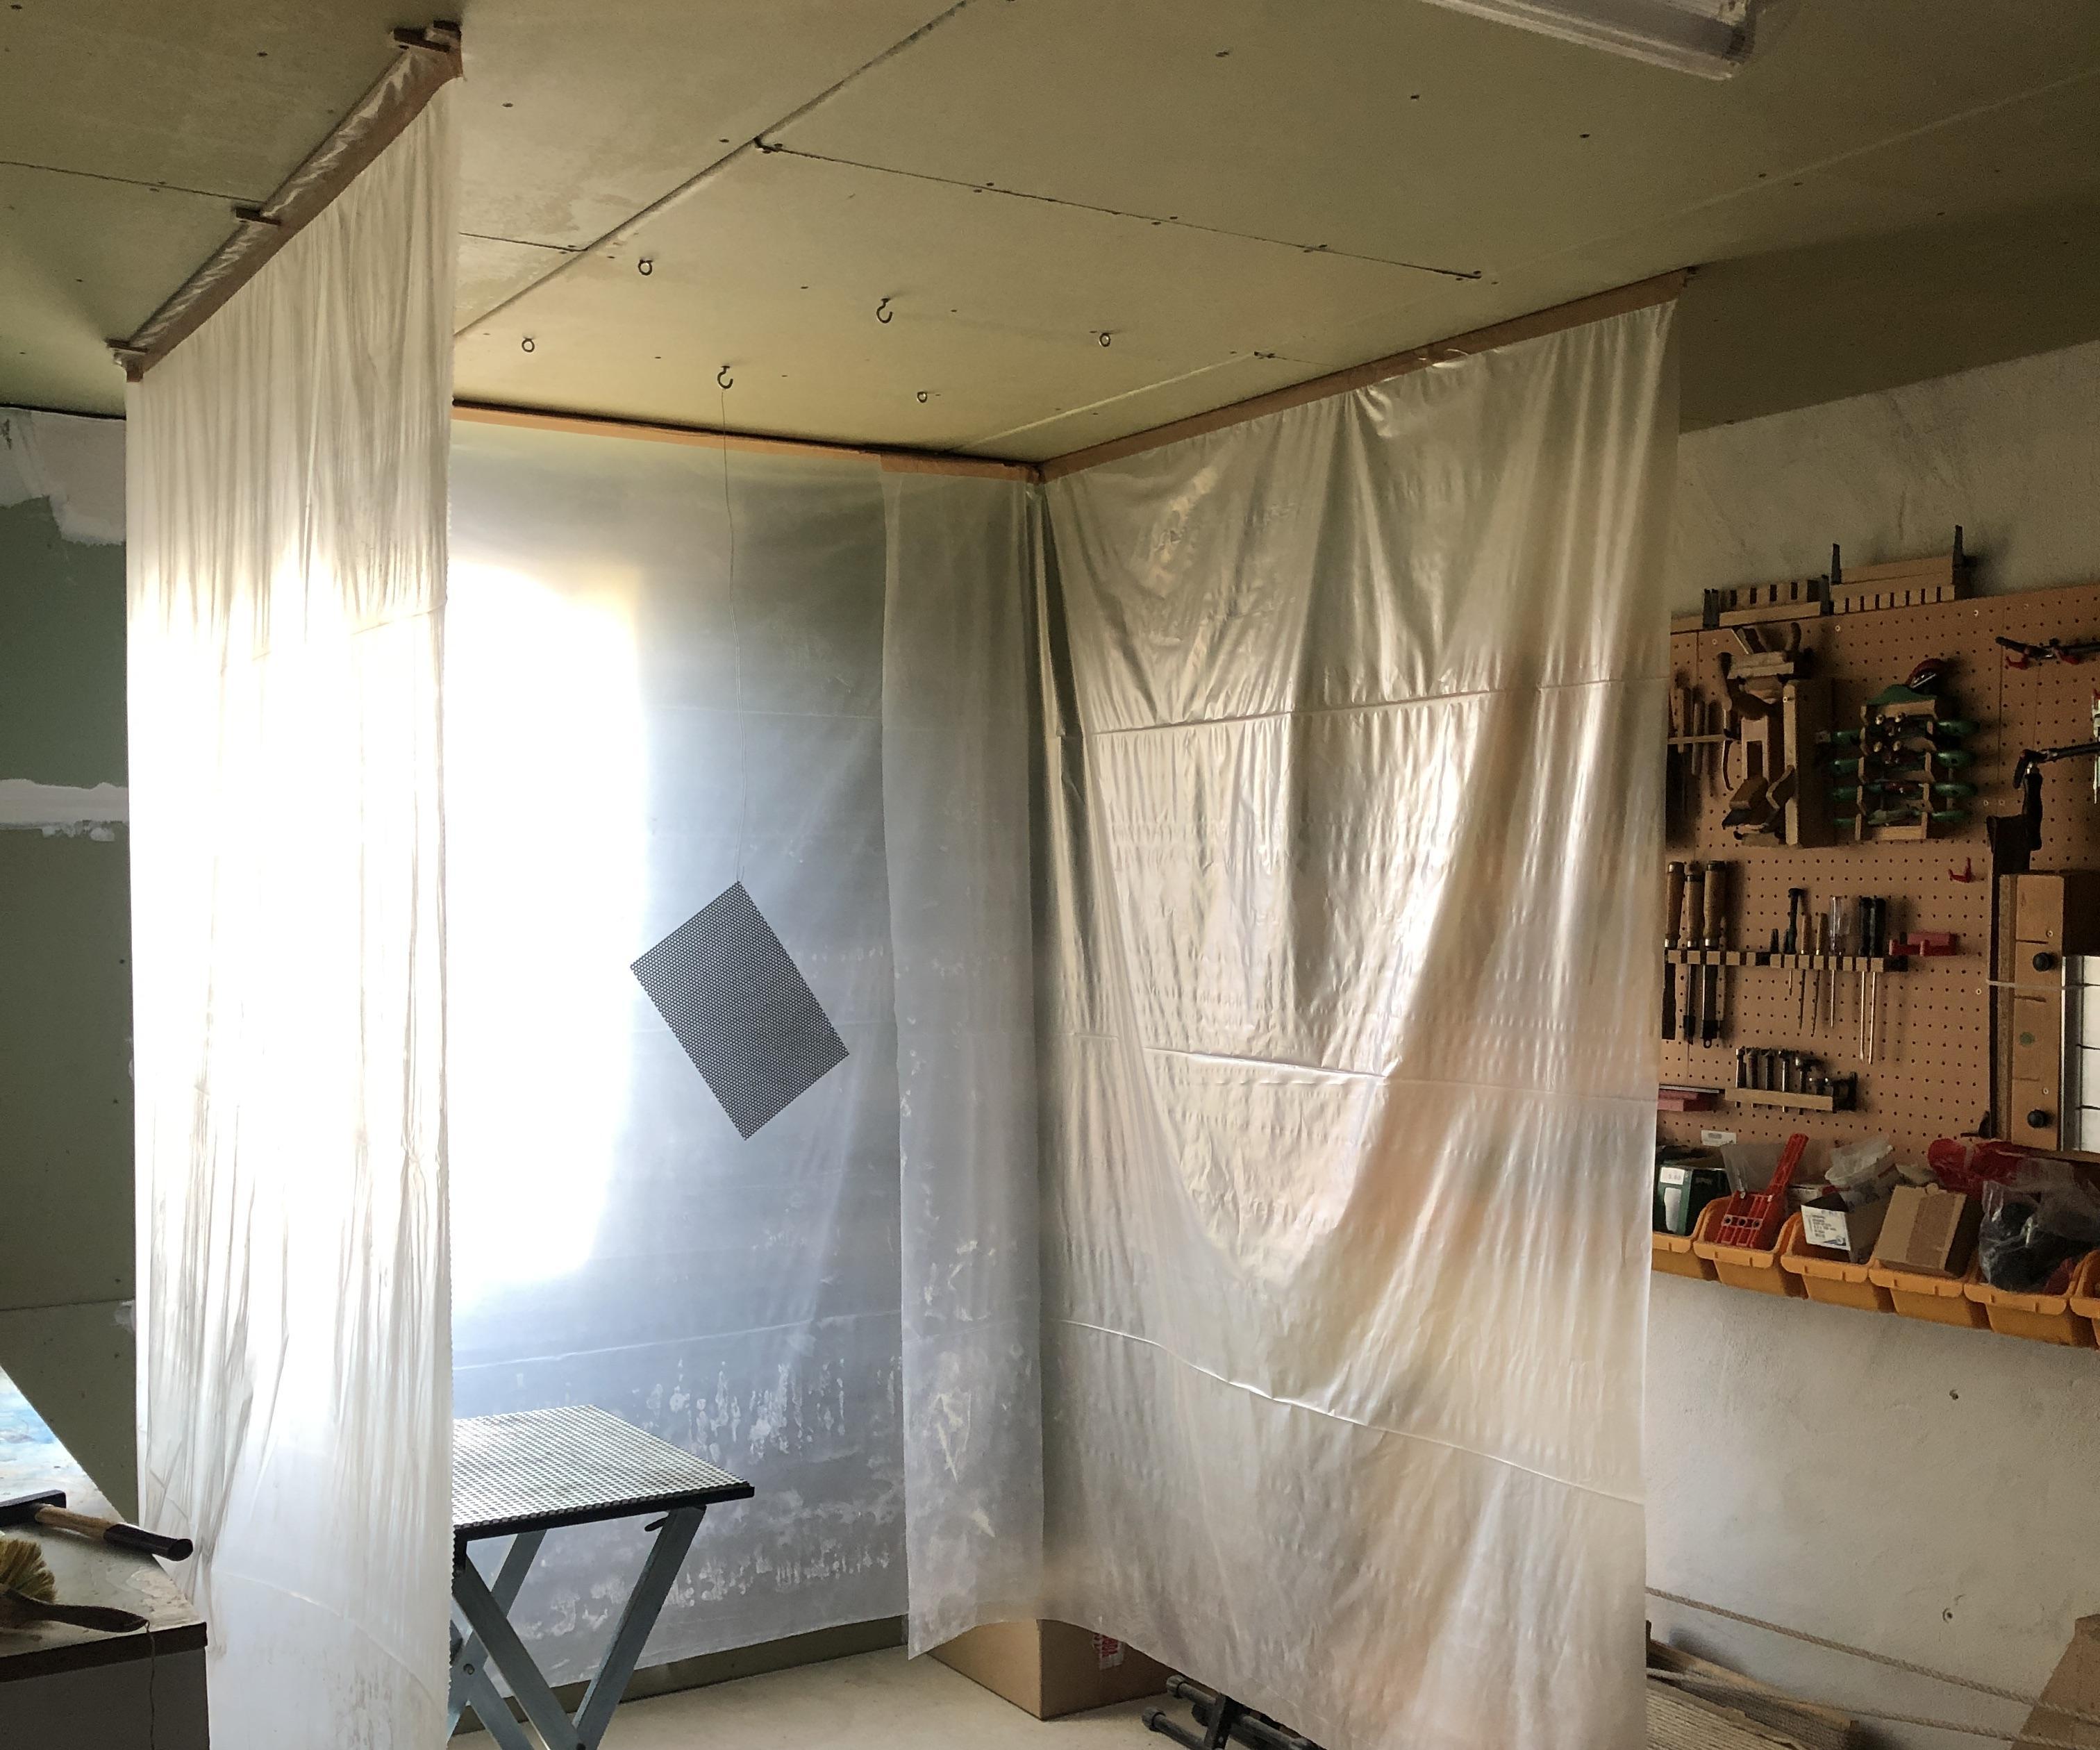 Removable Spray Booth for My Workshop